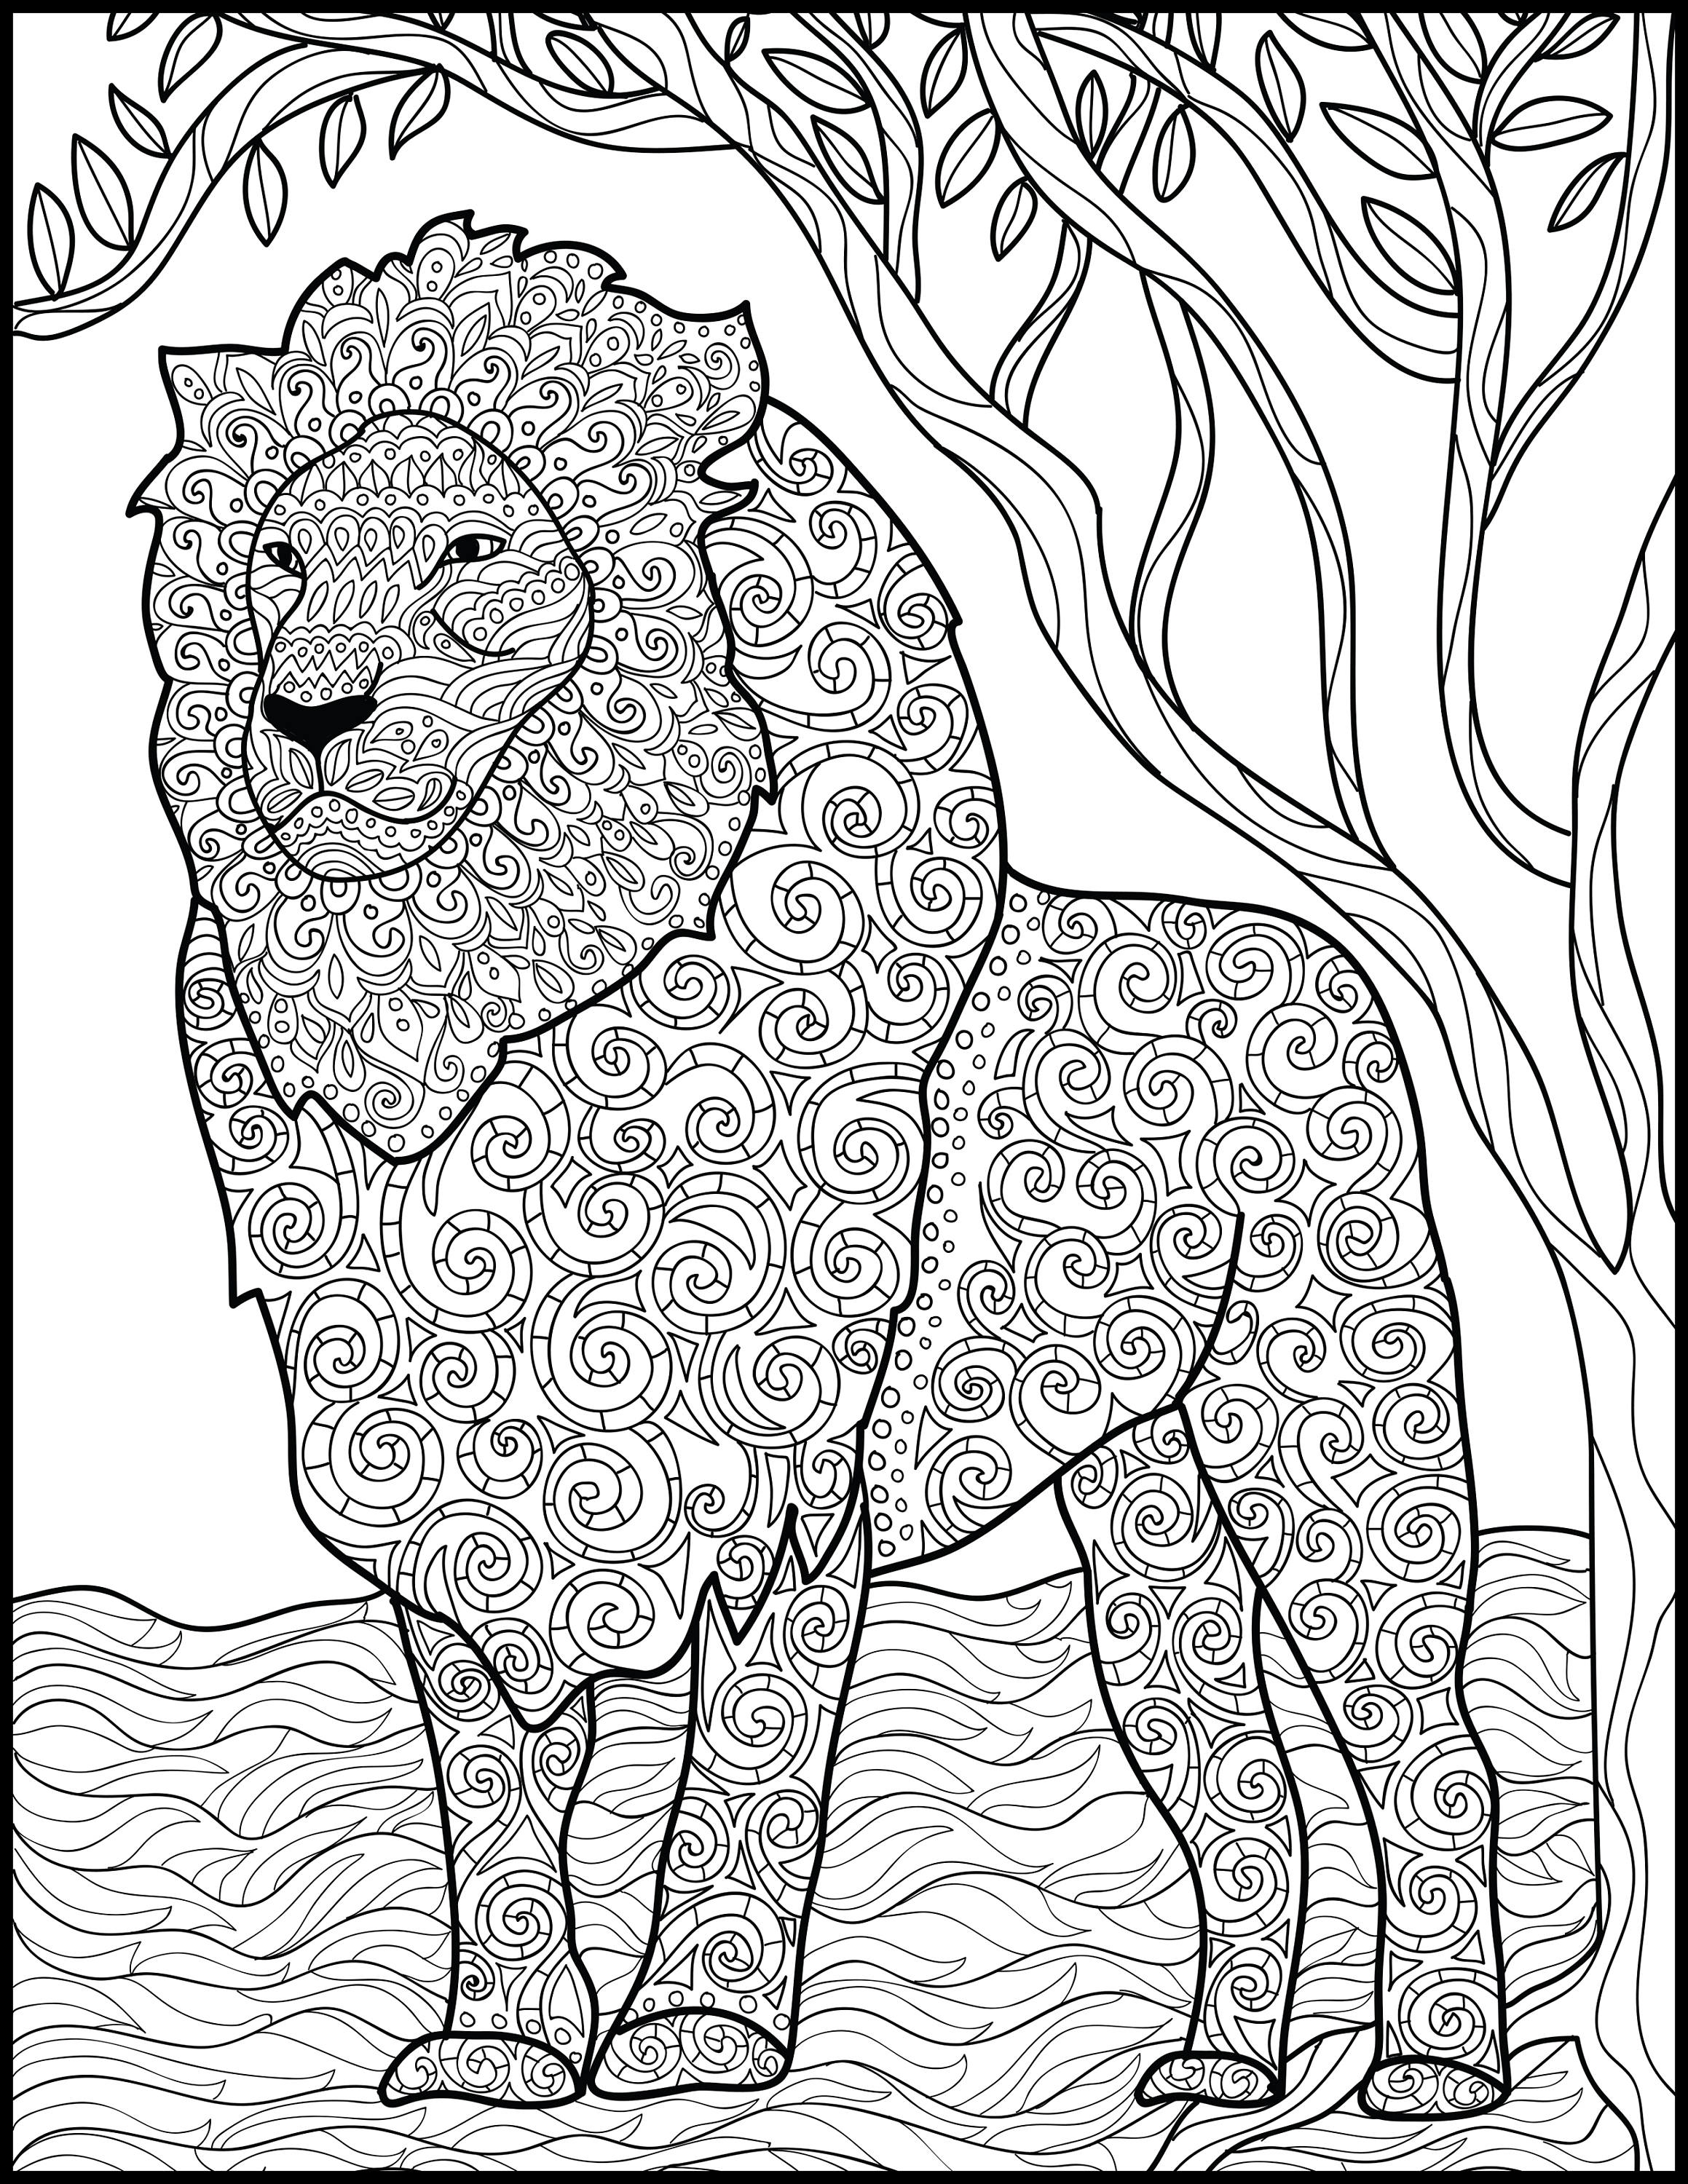 Intricate Coloring Pages For Kids At GetColorings Free Printable Colorings Pages To Print